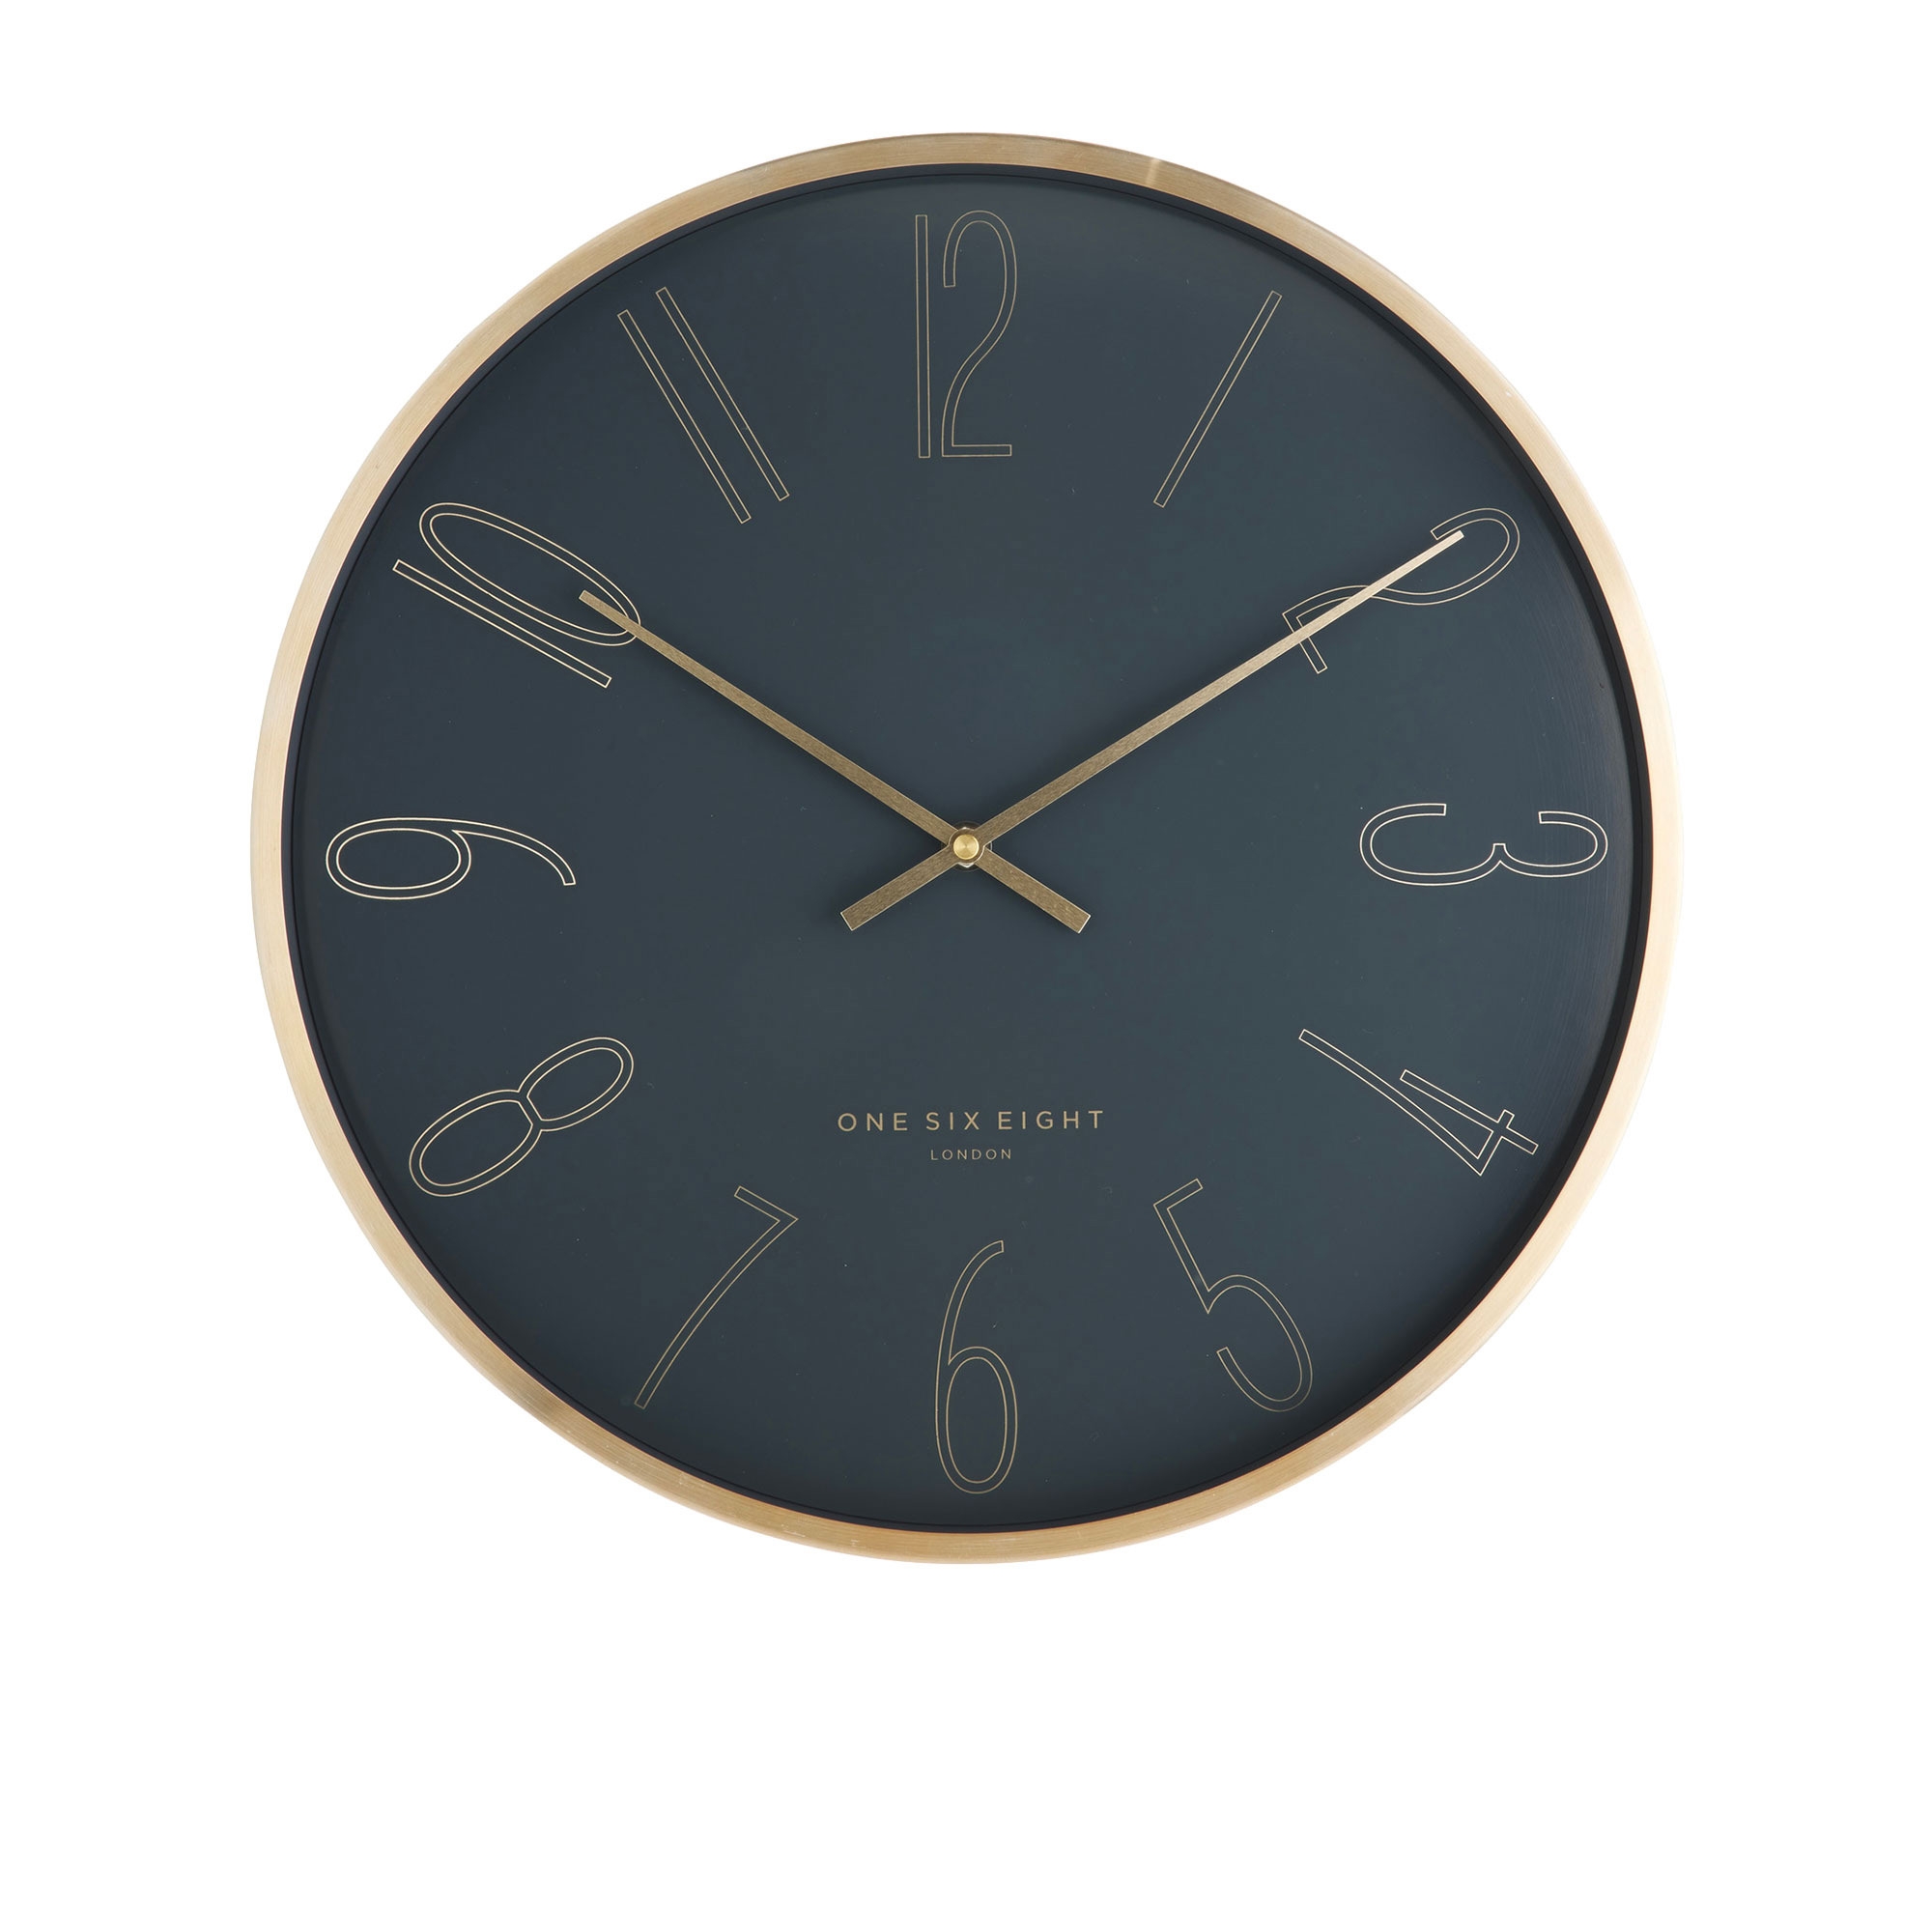 One Six Eight London Astrid Silent Wall Clock 40cm Charcoal Grey Image 1